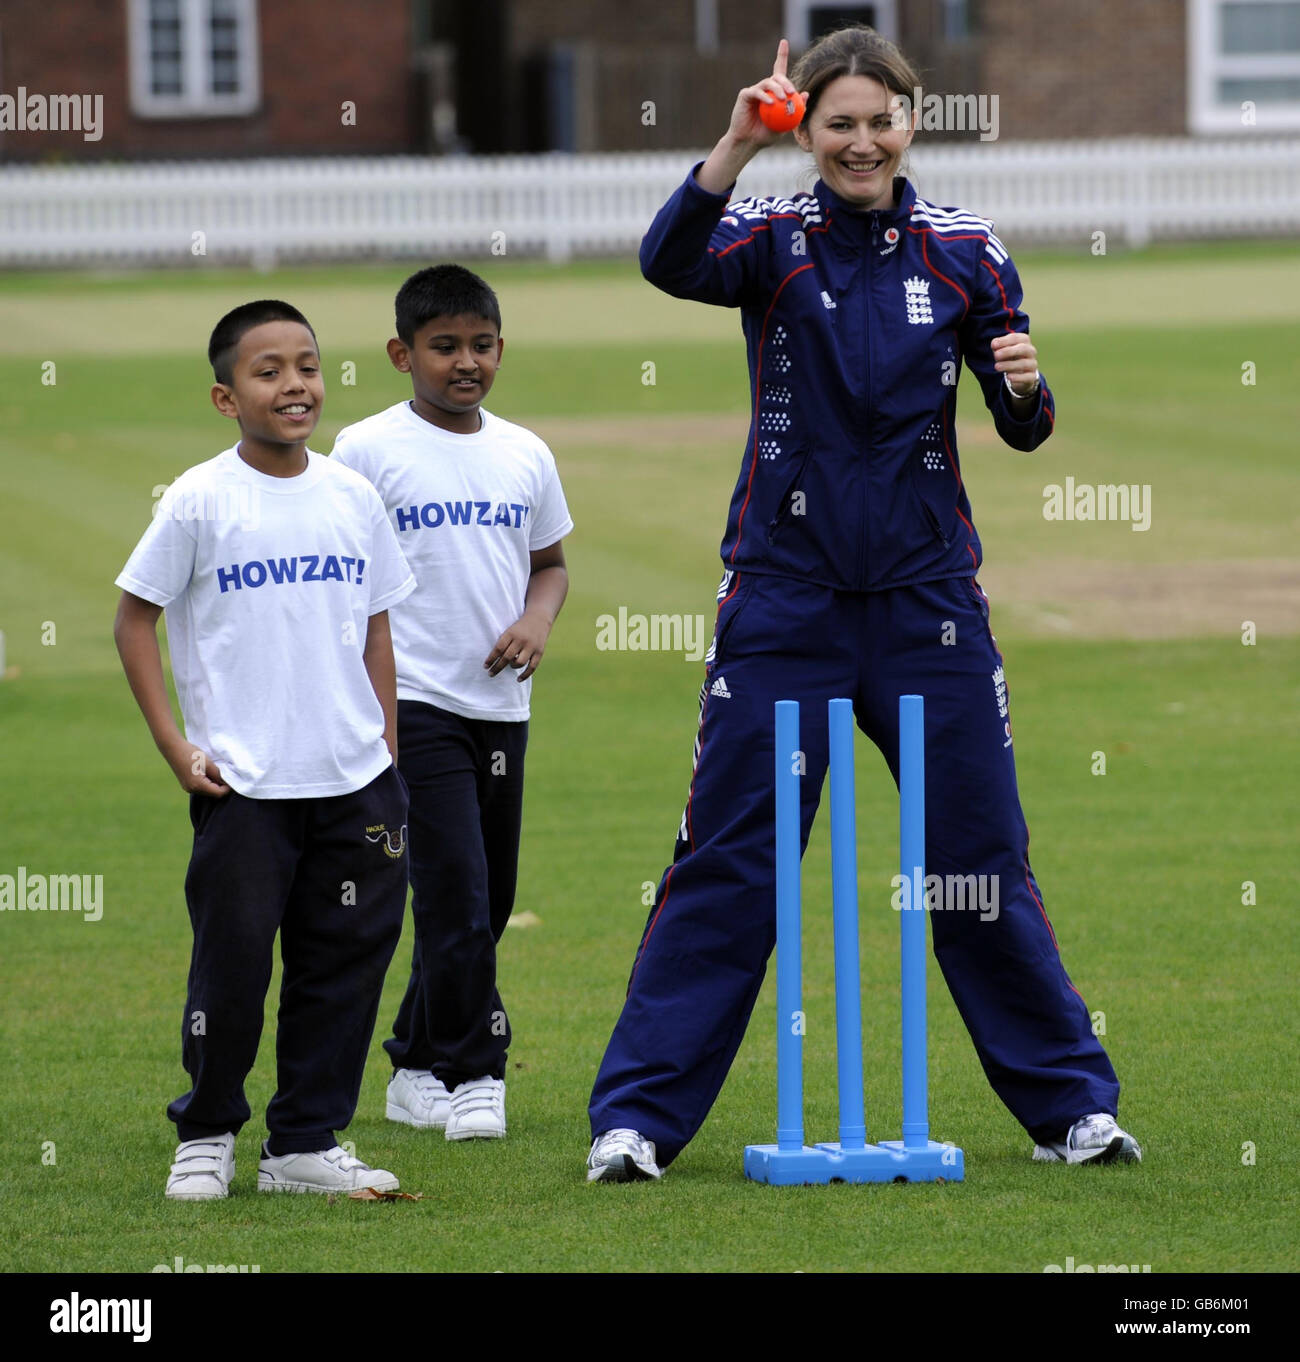 England Women's Captain Charlotte Edwards during the launch of the Howzat campaign at Lord's Cricket Ground, St John's Wood, London. Stock Photo